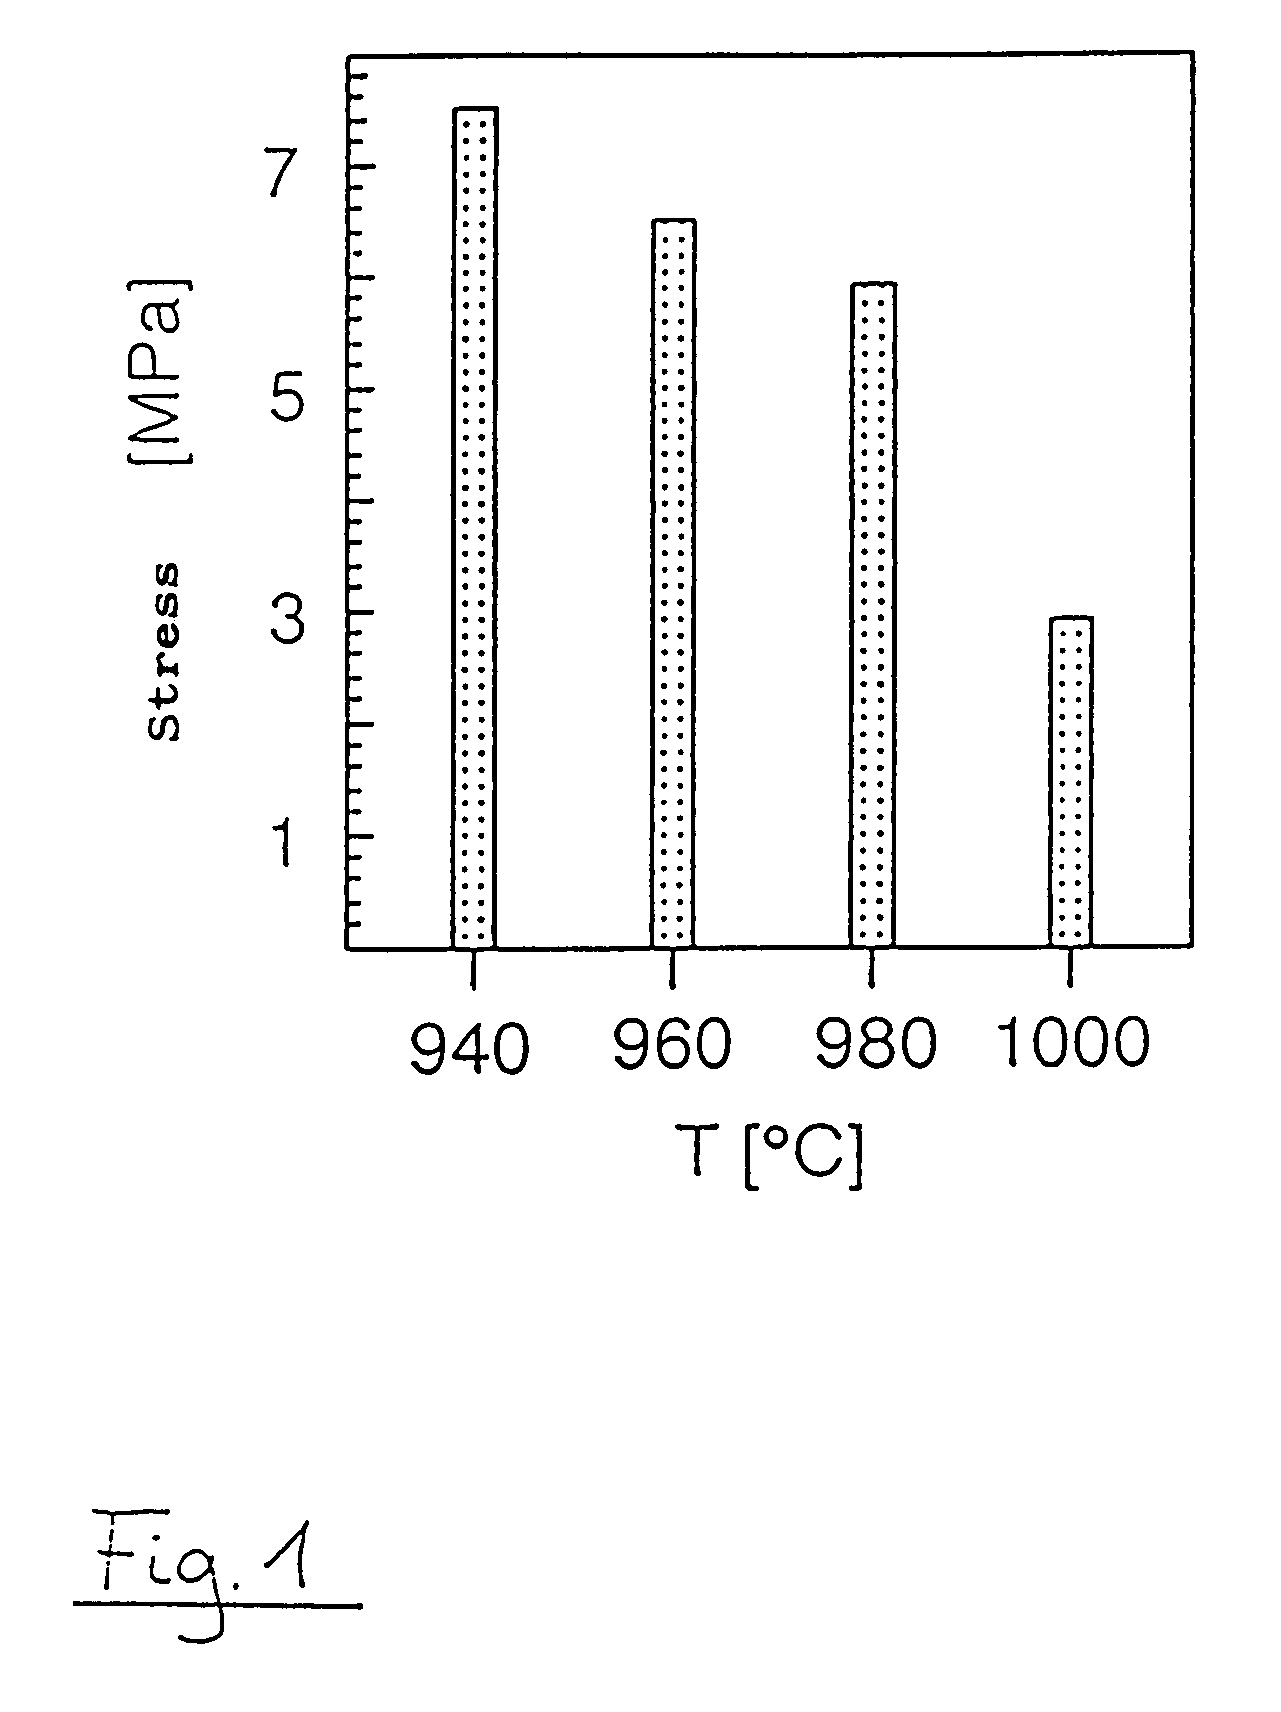 Method of fabricating micromechanical components with free-standing microstructures or membranes